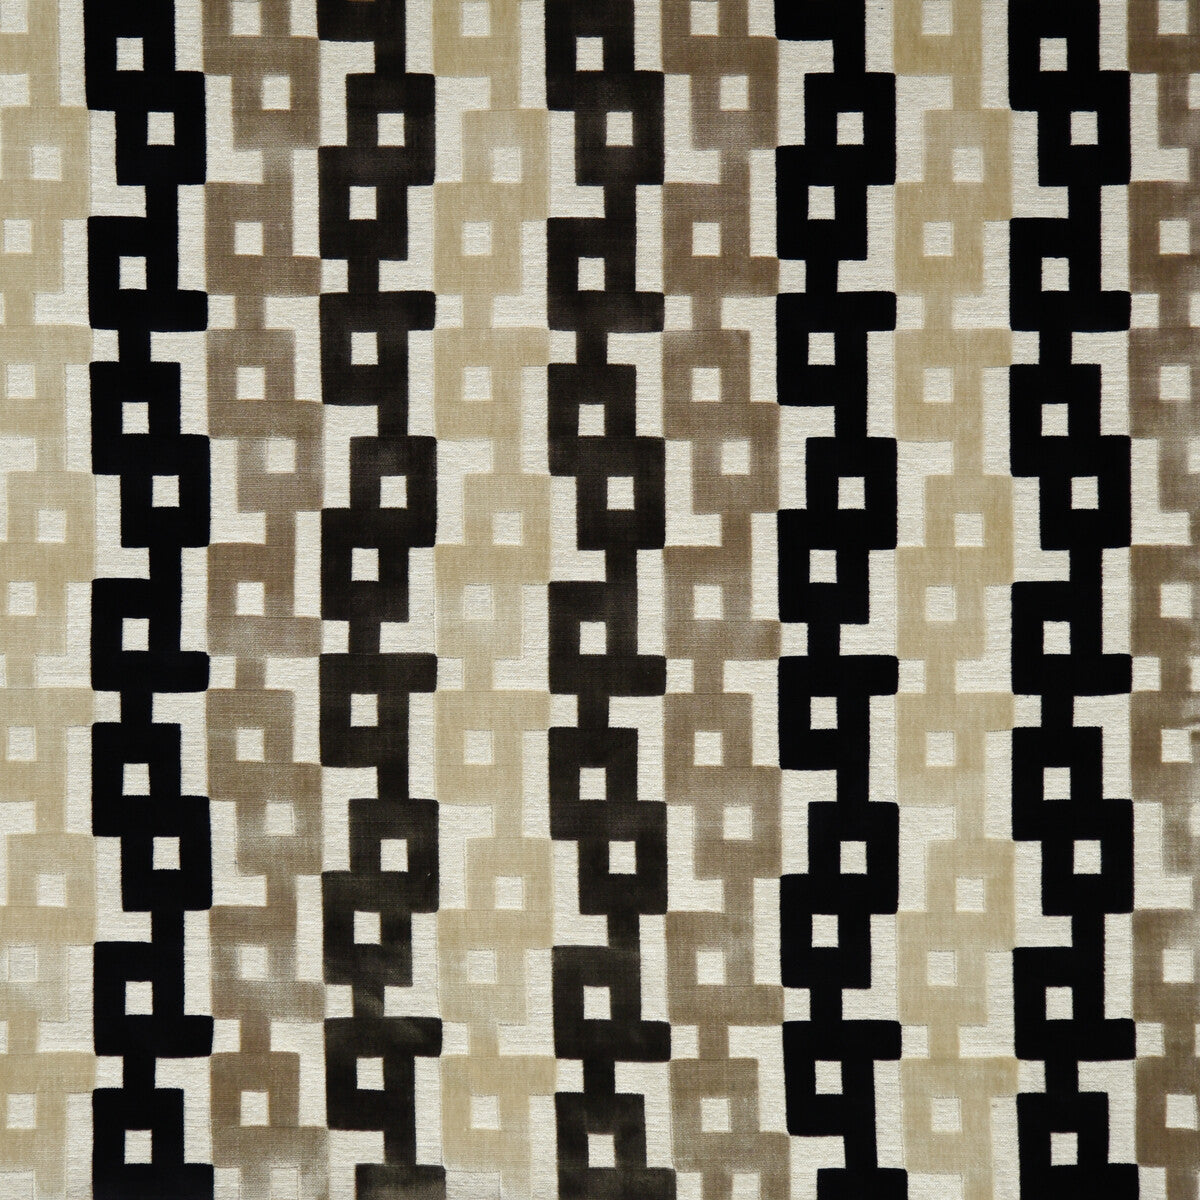 Chain Velvet fabric in onyx color - pattern 35856.816.0 - by Kravet Couture